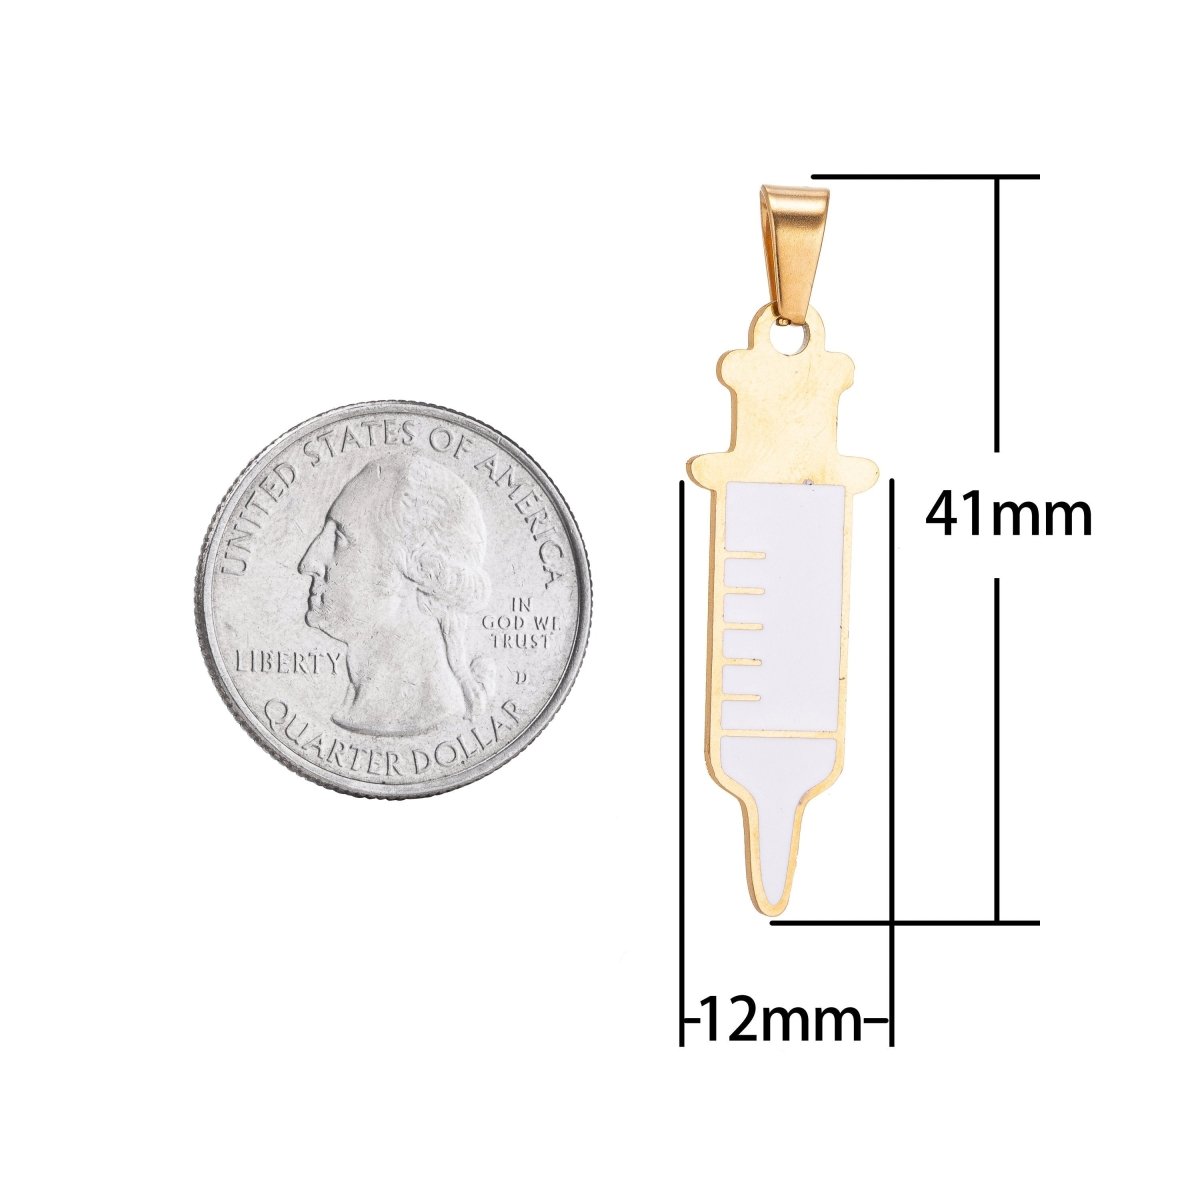 Gold Filled Shot SYRINGE Charms Nurse RN Doctor Medical Themed Pendant Gift idea for Jewelry Making J-412 - DLUXCA